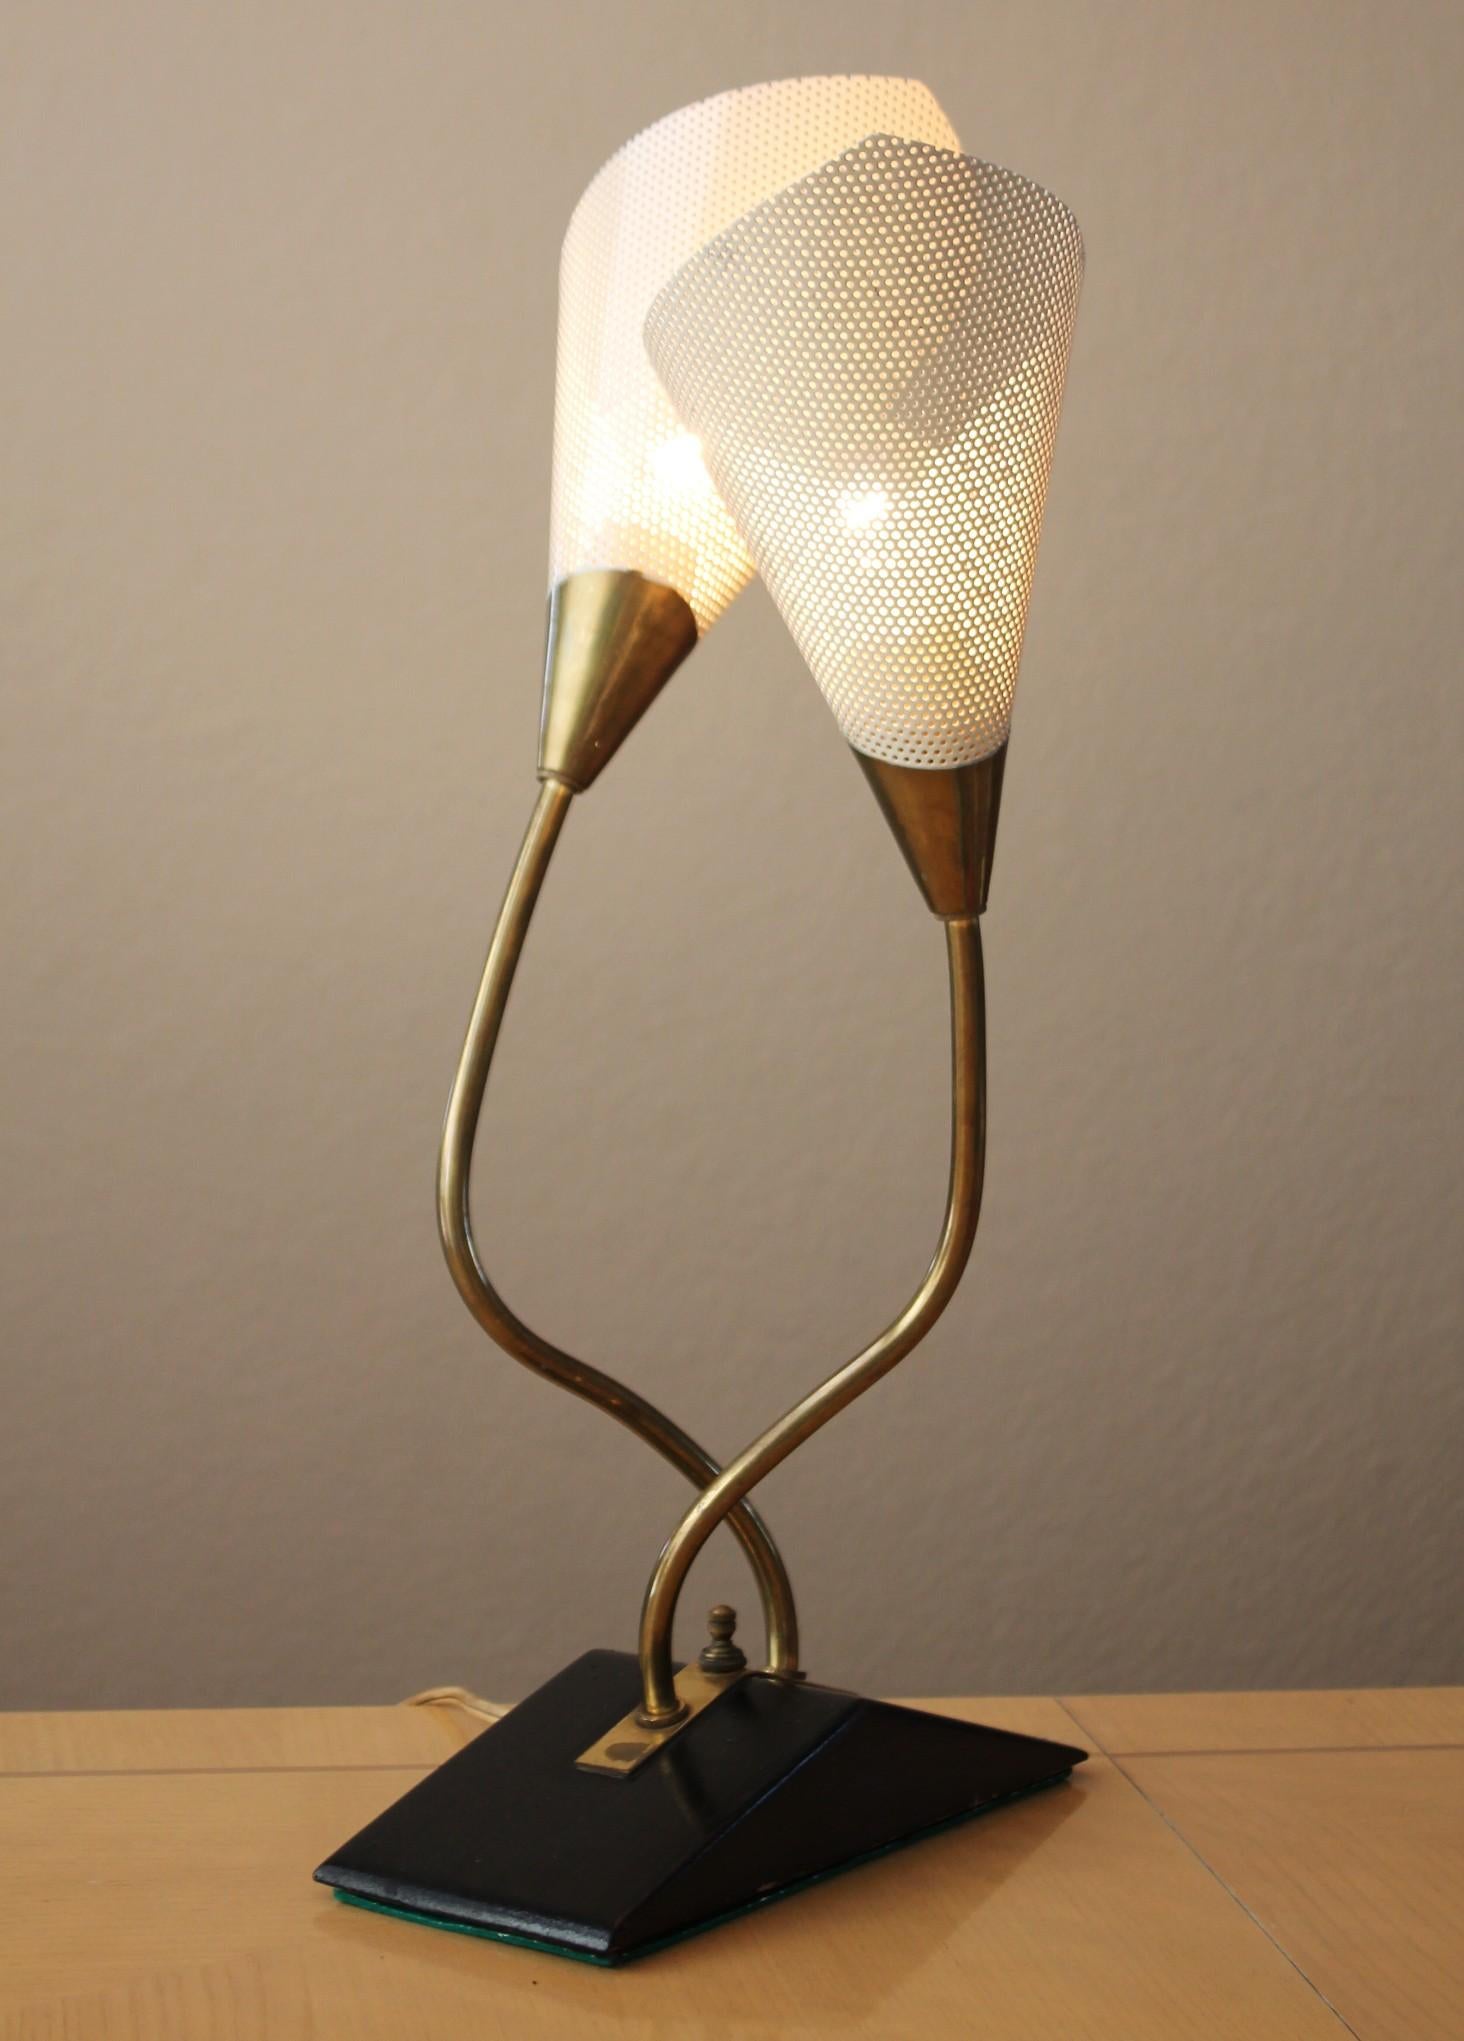 MAJESTIC MID CENTURY TABLE LAMP

STUNNING!

PERFORATED SCREENS
WOOD & BRASS


EXQUISITE MID CENTURY ELEGANCE! 

HEIGHT: 20